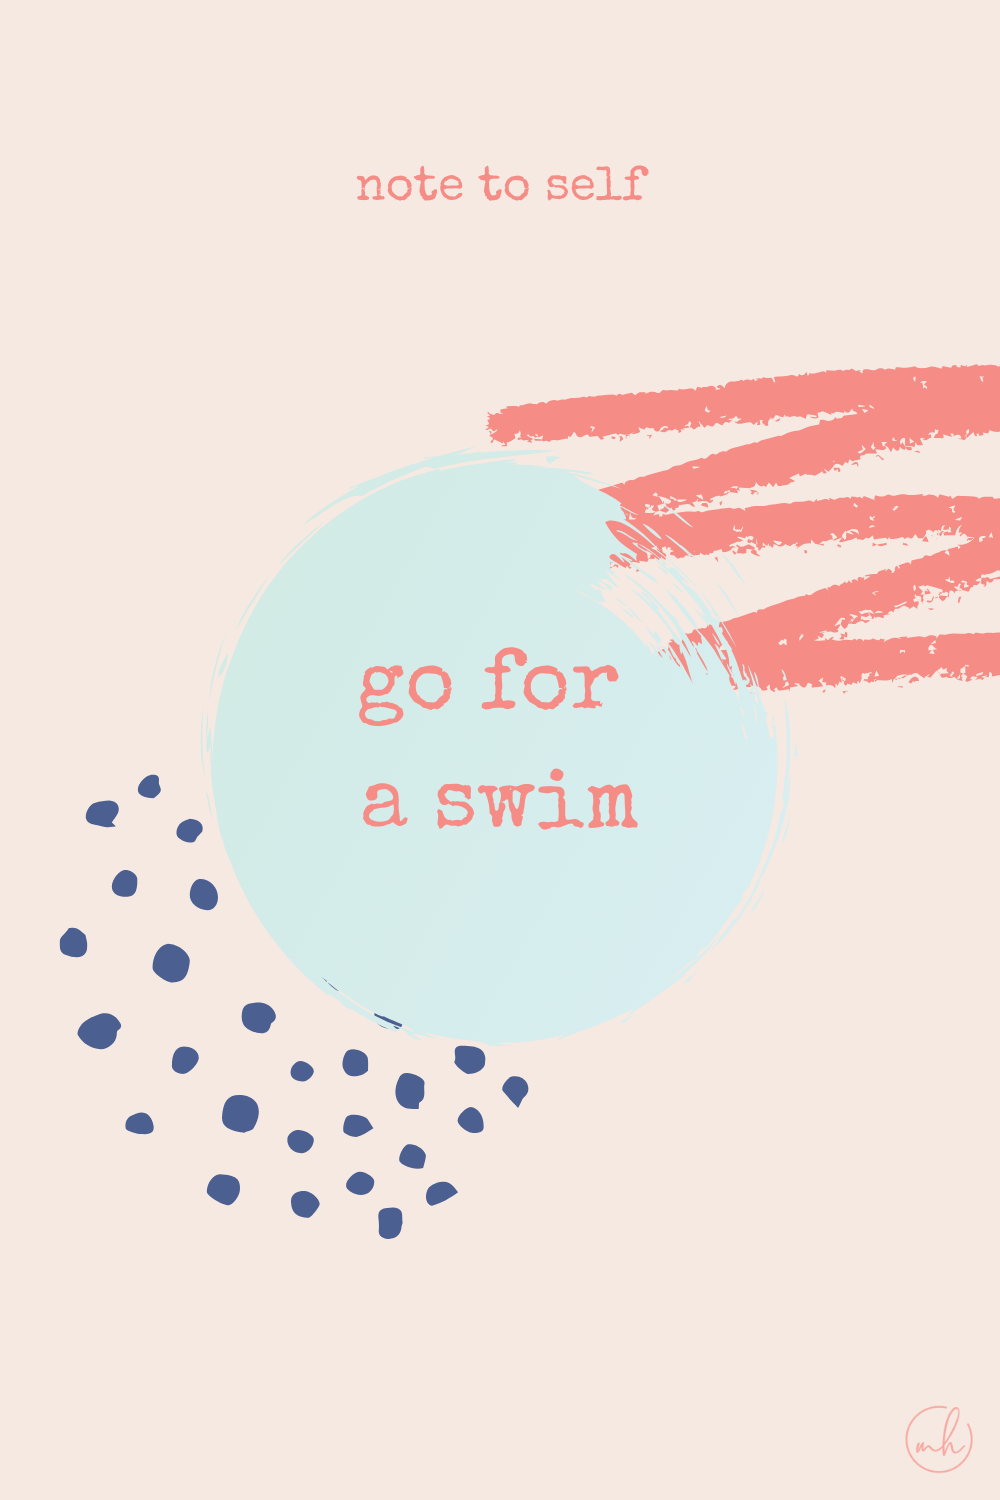 Go for a swim - Note to self quotes | myhoogah